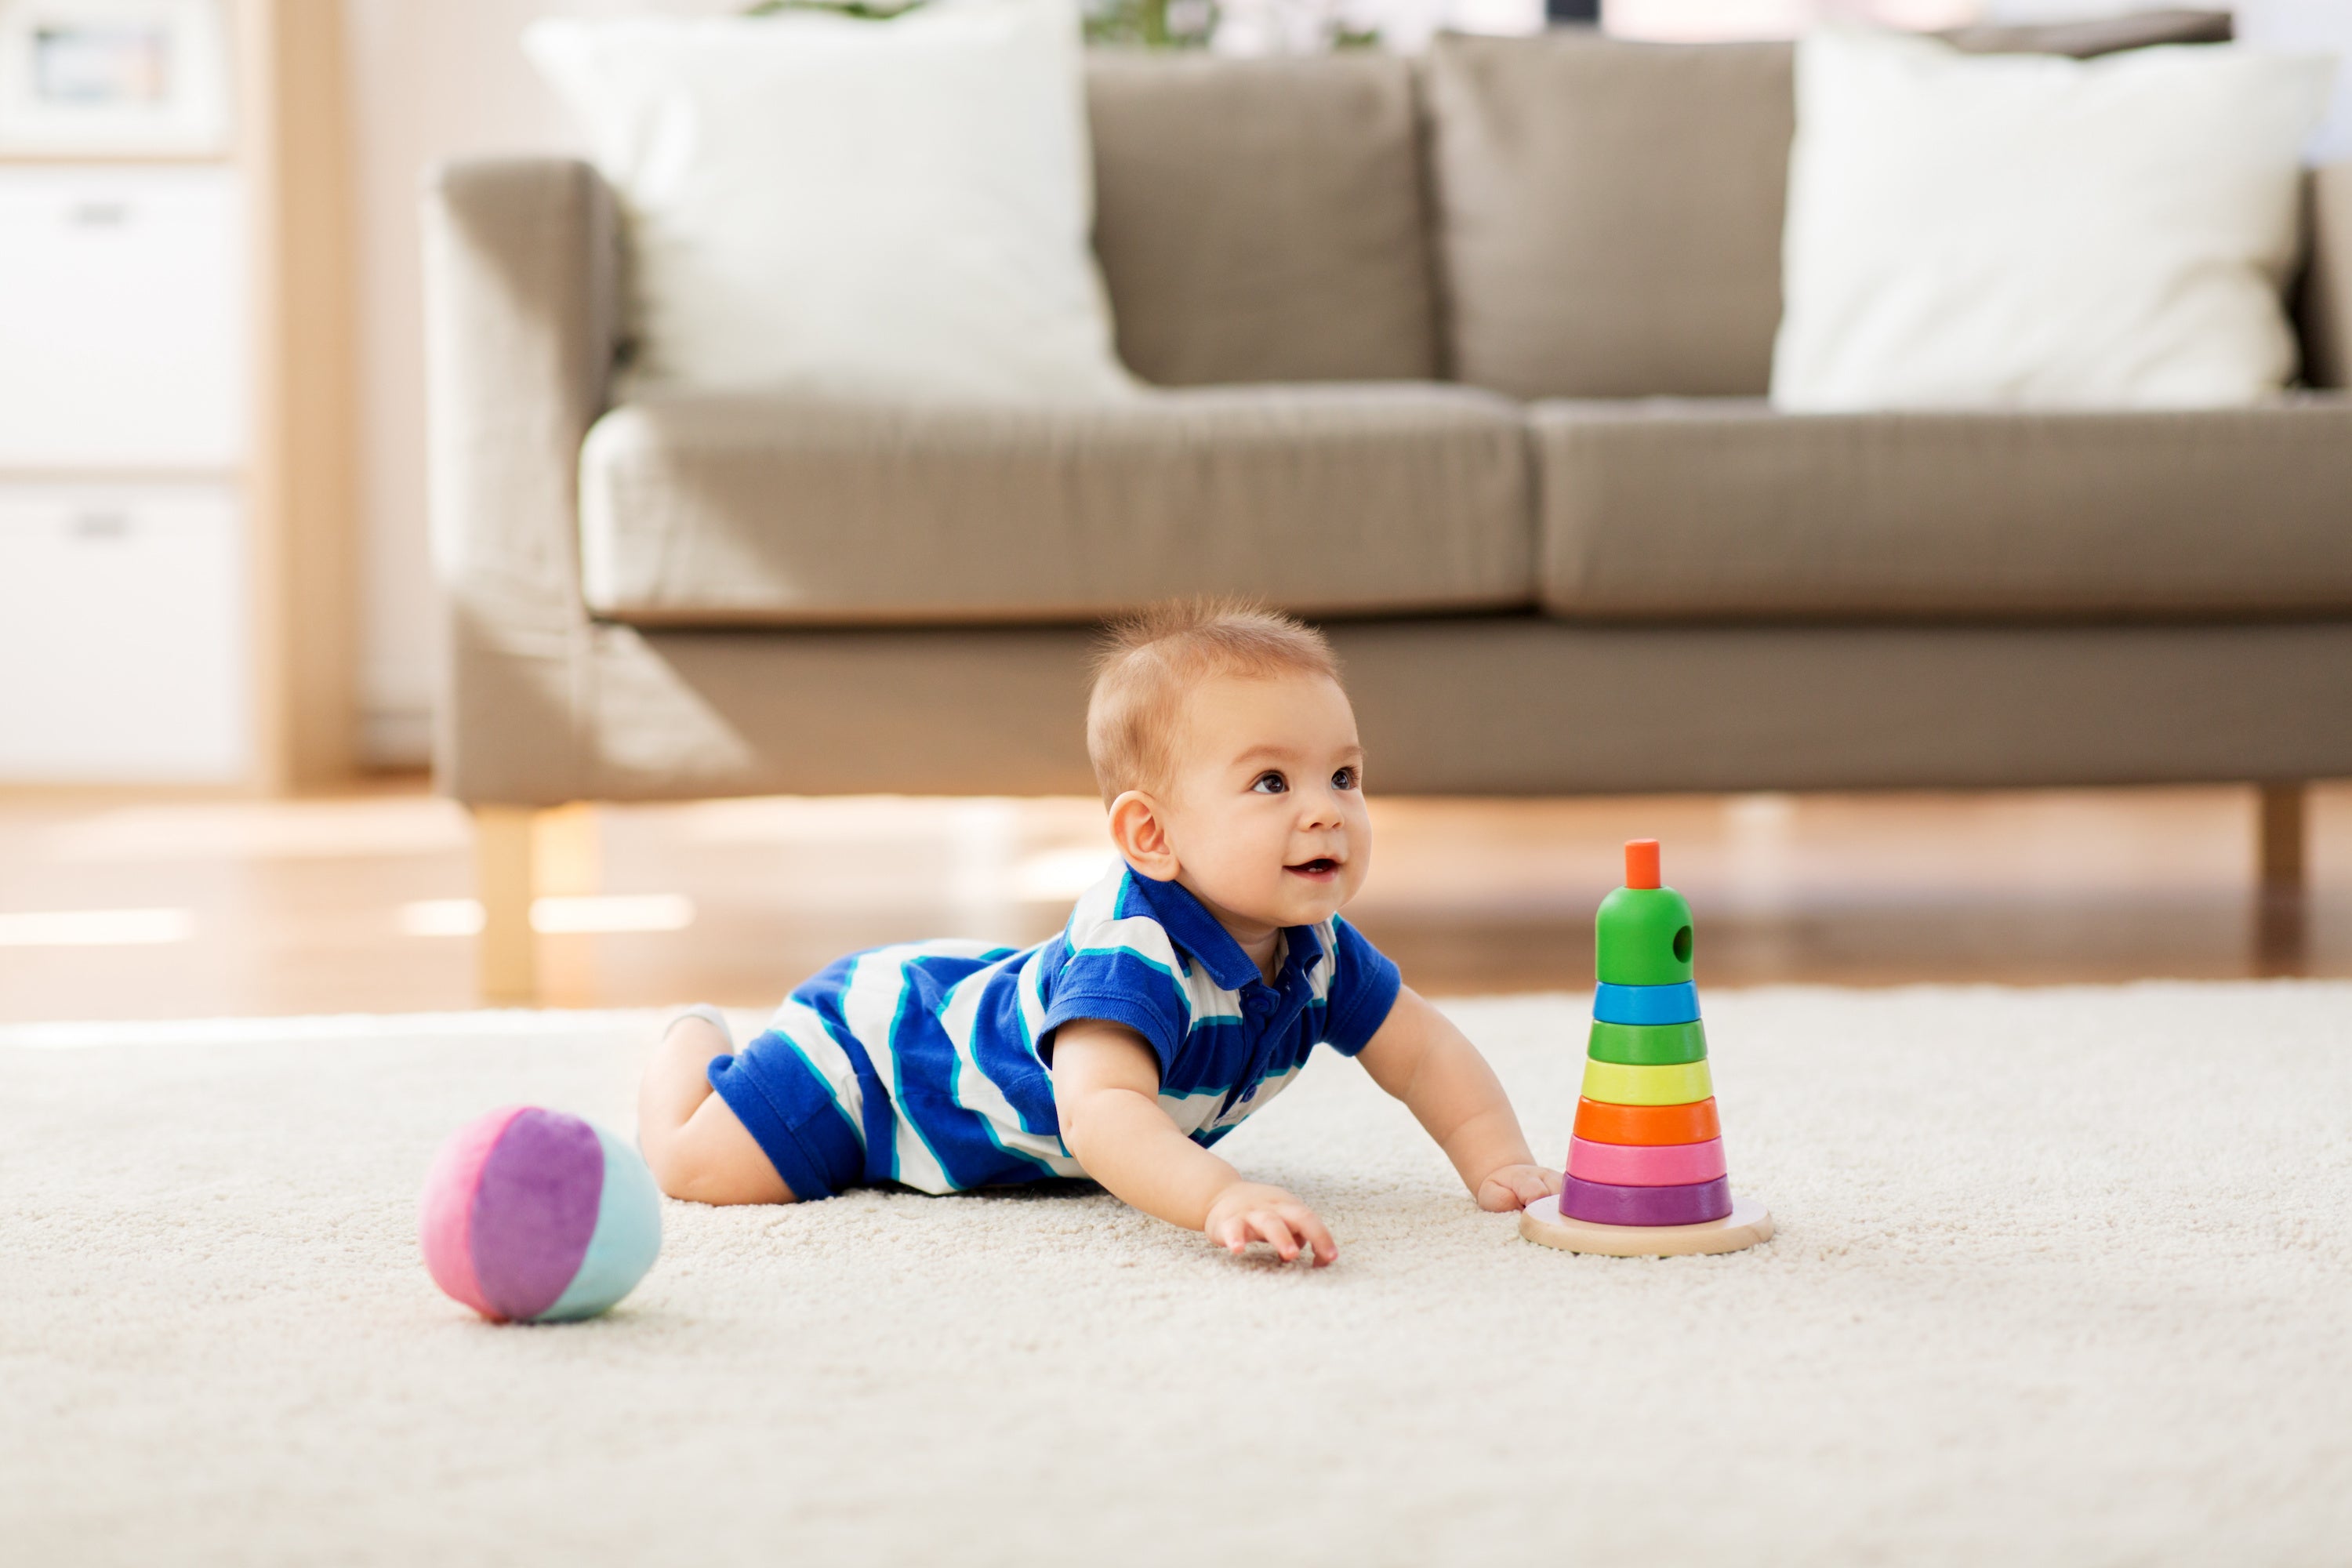 10 Simple Ideas To Baby-Proof Your Home